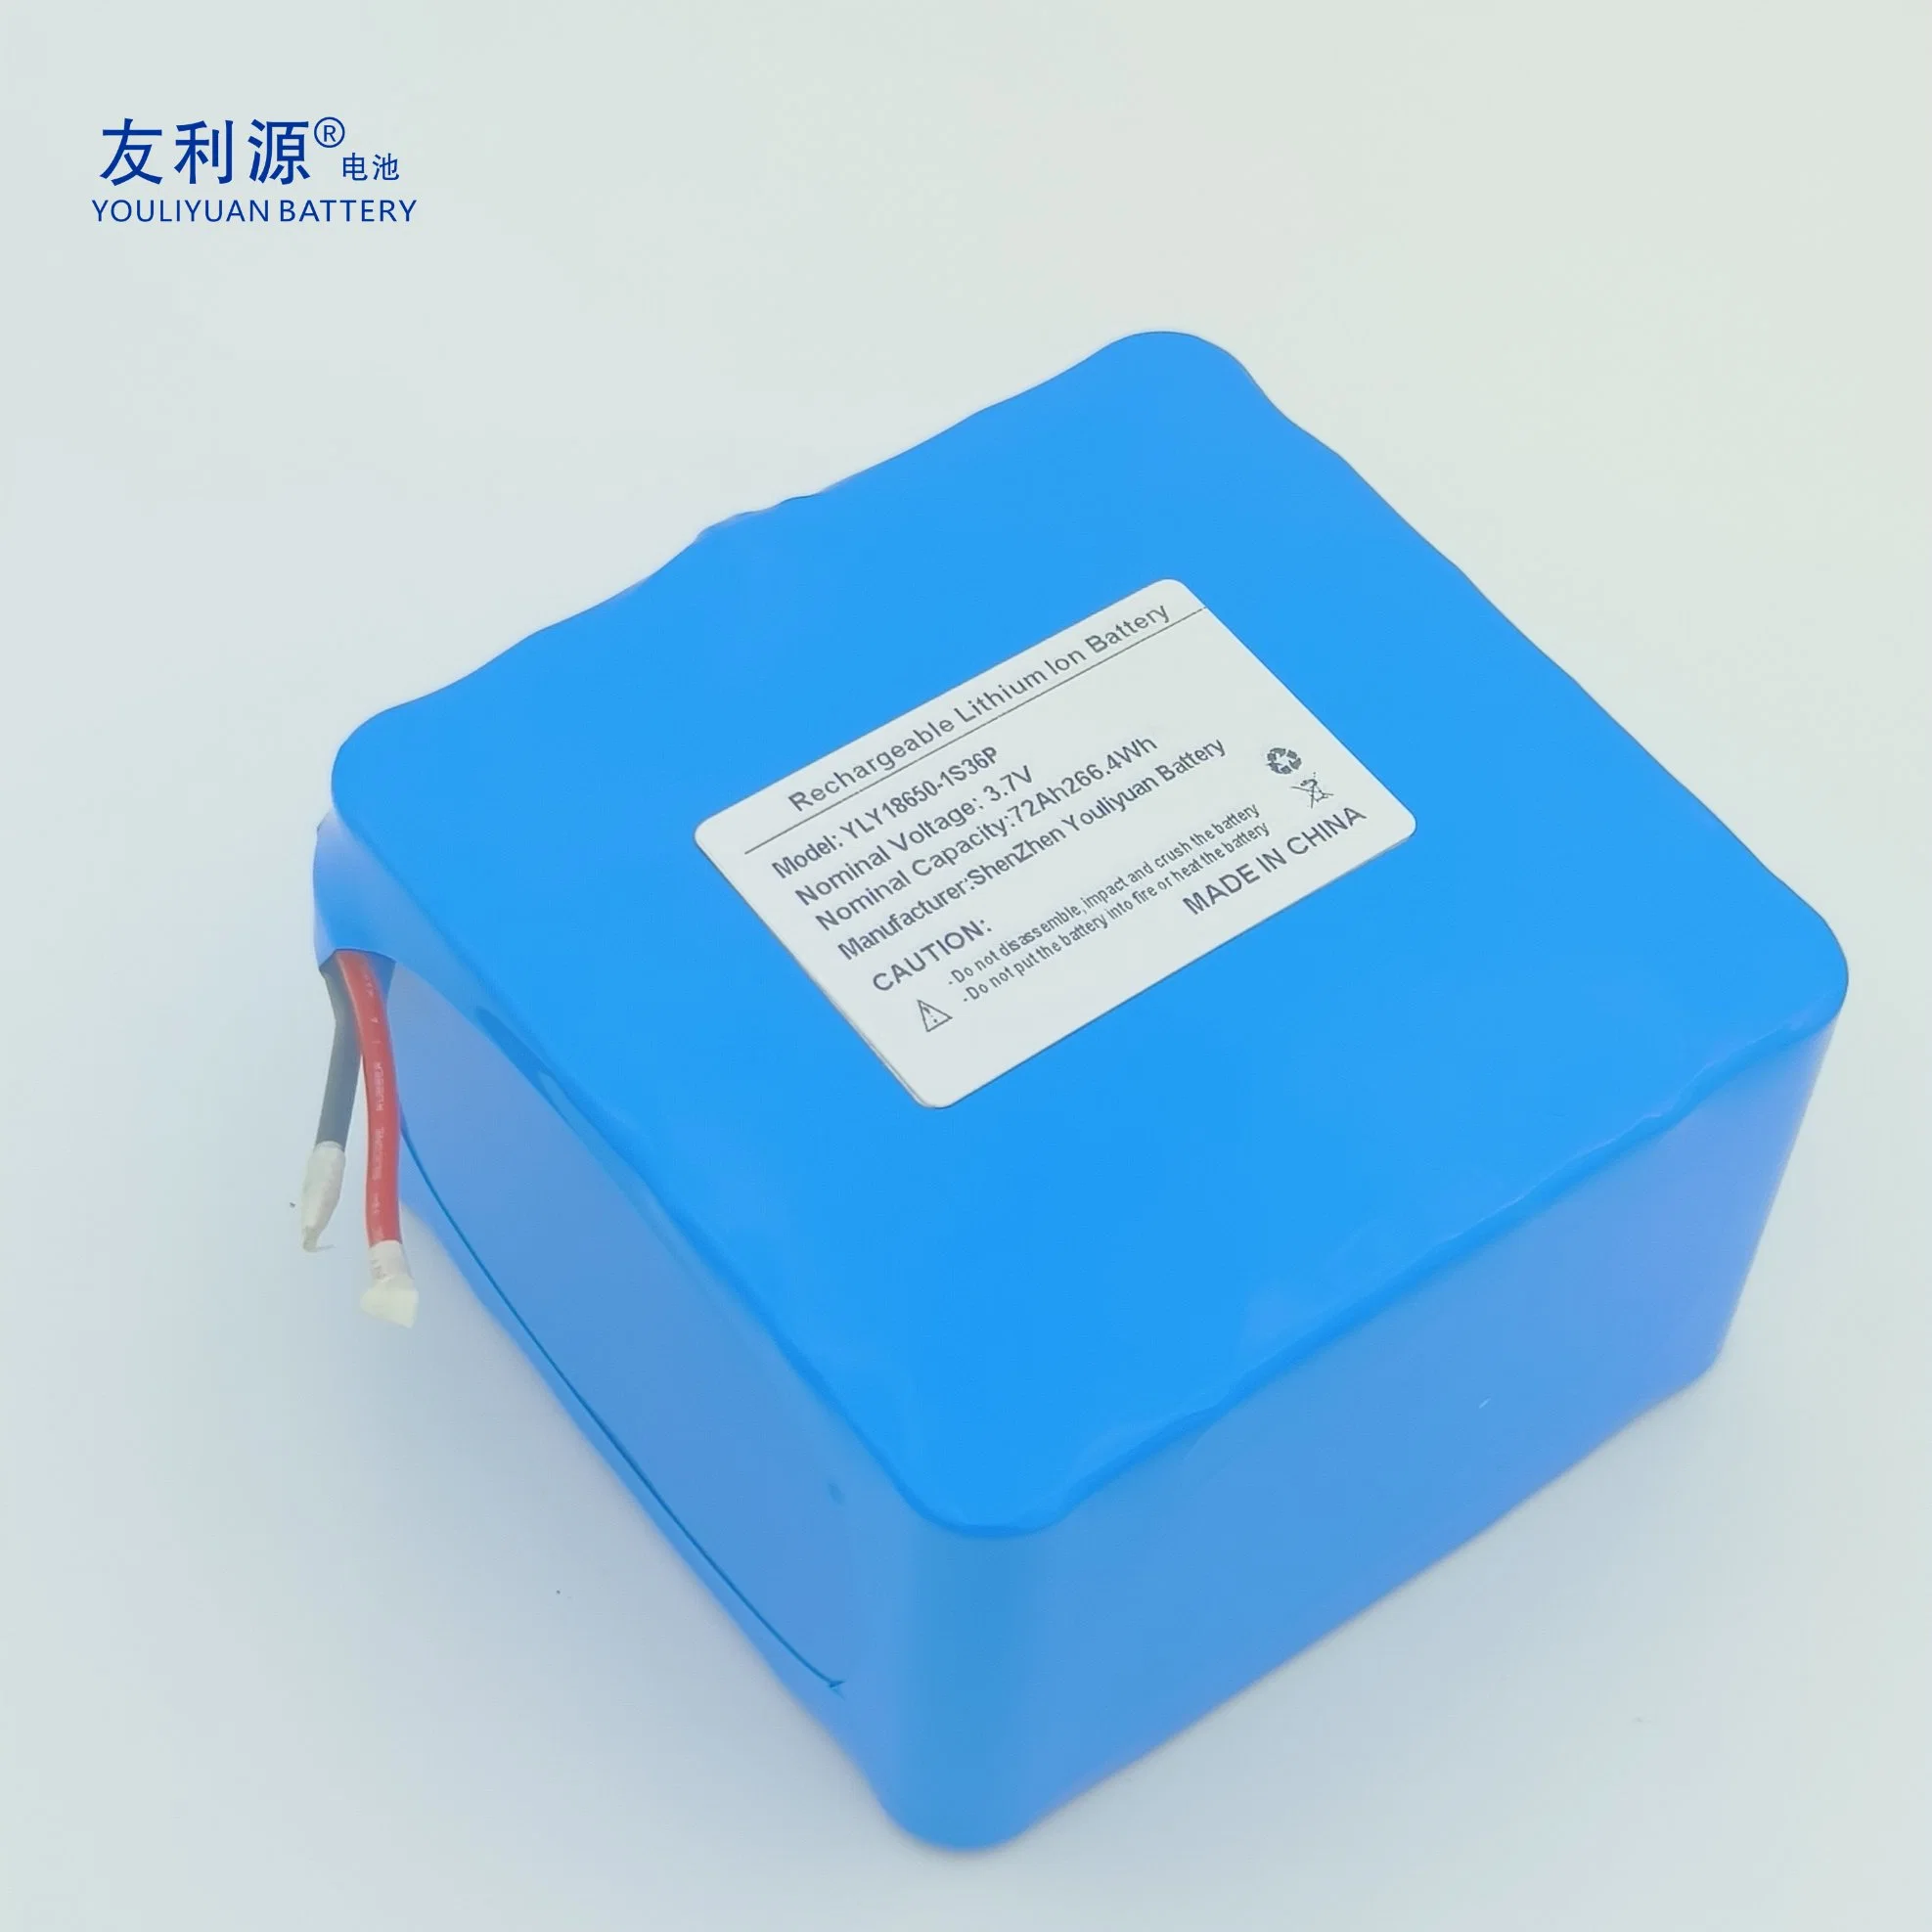 OEM/ODM Rechargeable 18650 Battery 1s36p 3.7V 72ah Lithium Ion Battery Pack Emergency Battery UPS Battery Power Tool Battery Energy Storage Battery